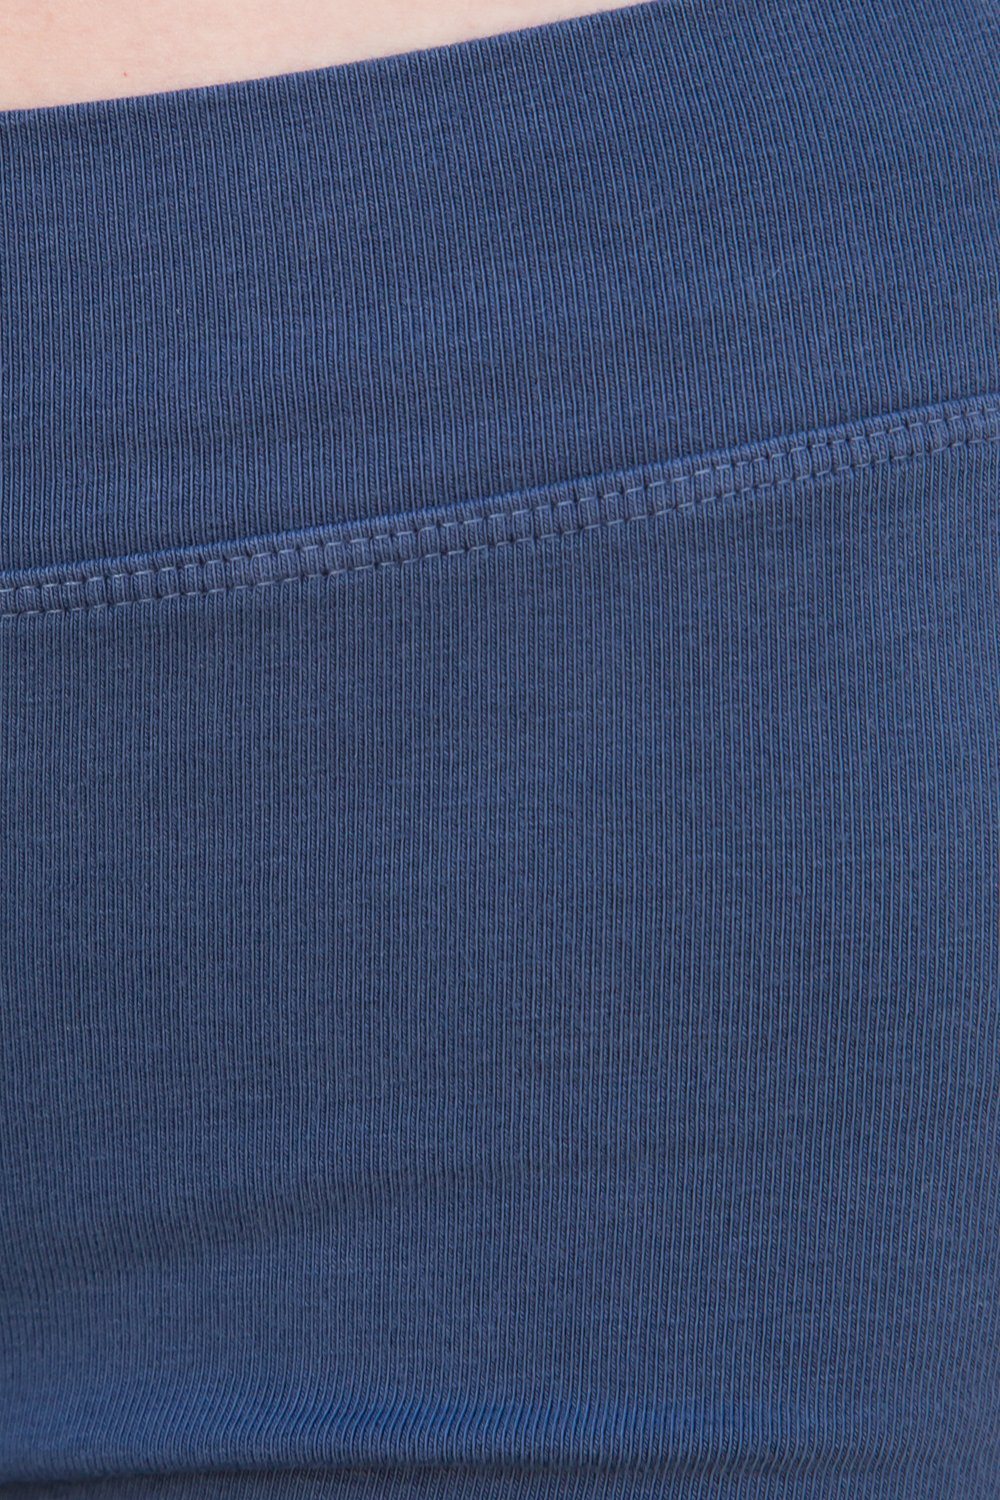 Faded Navy Blue / XS/S